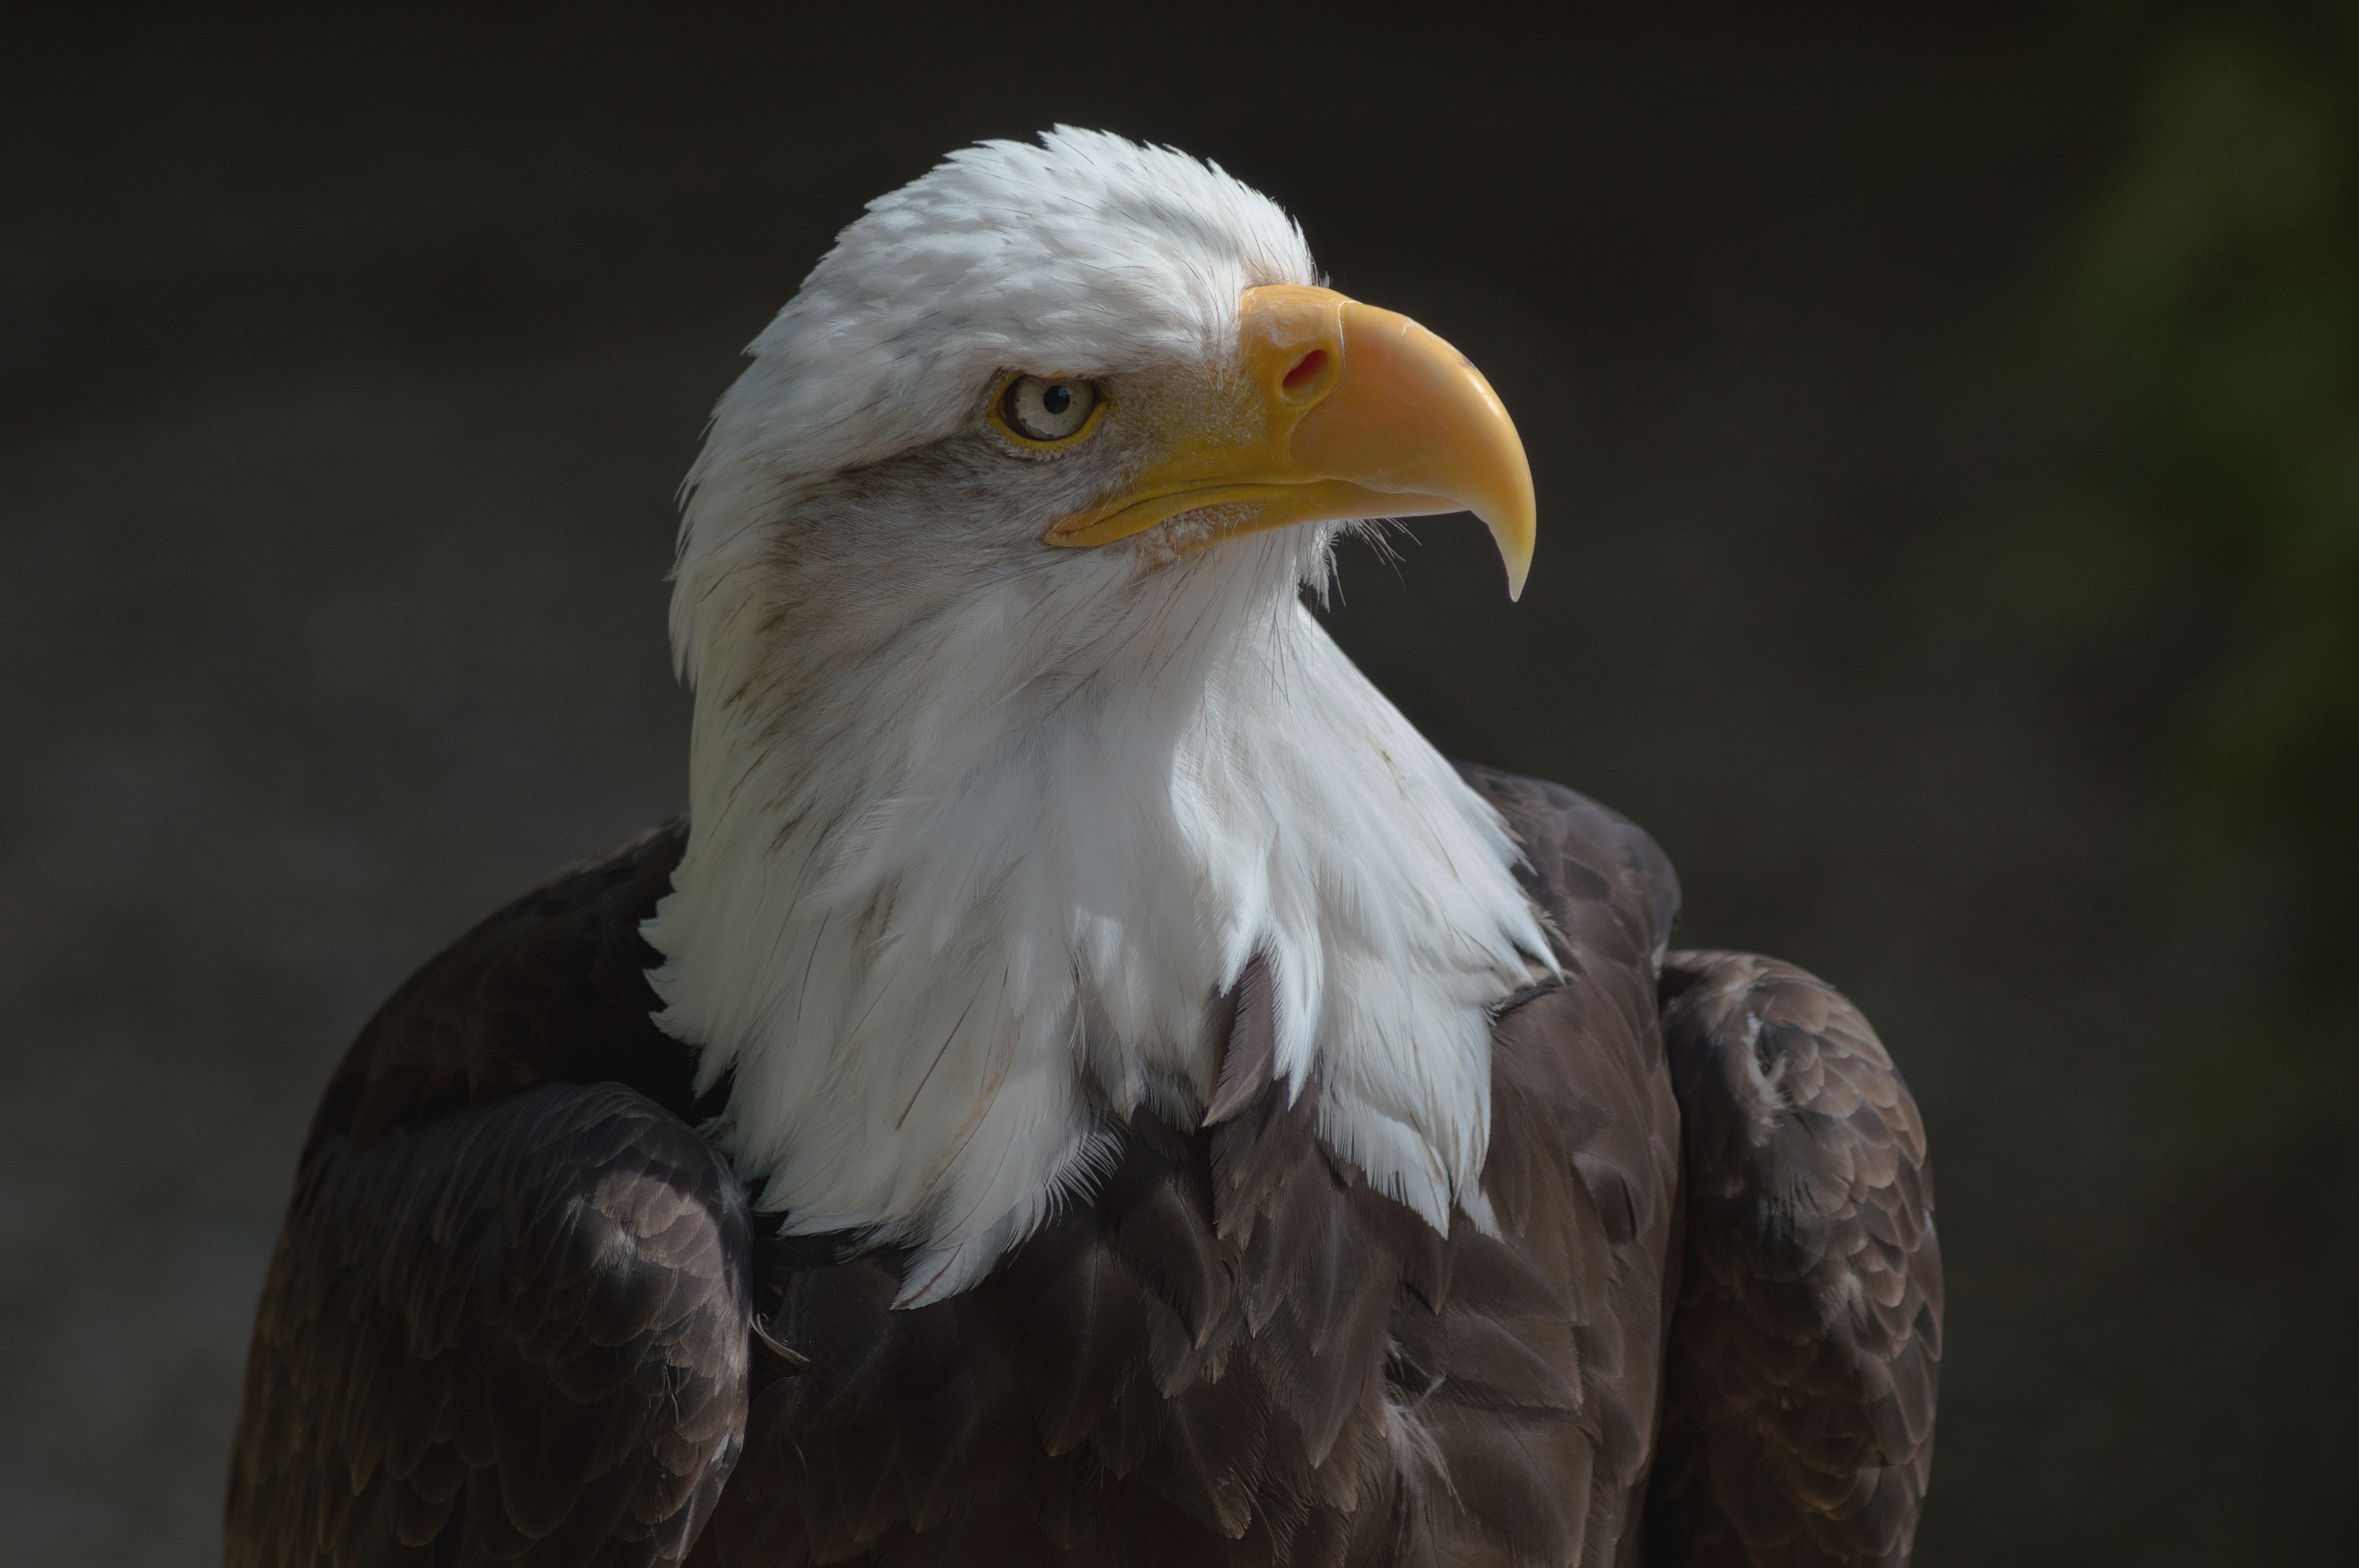 Bald eagle at the Hawk Conservancy Trust 2